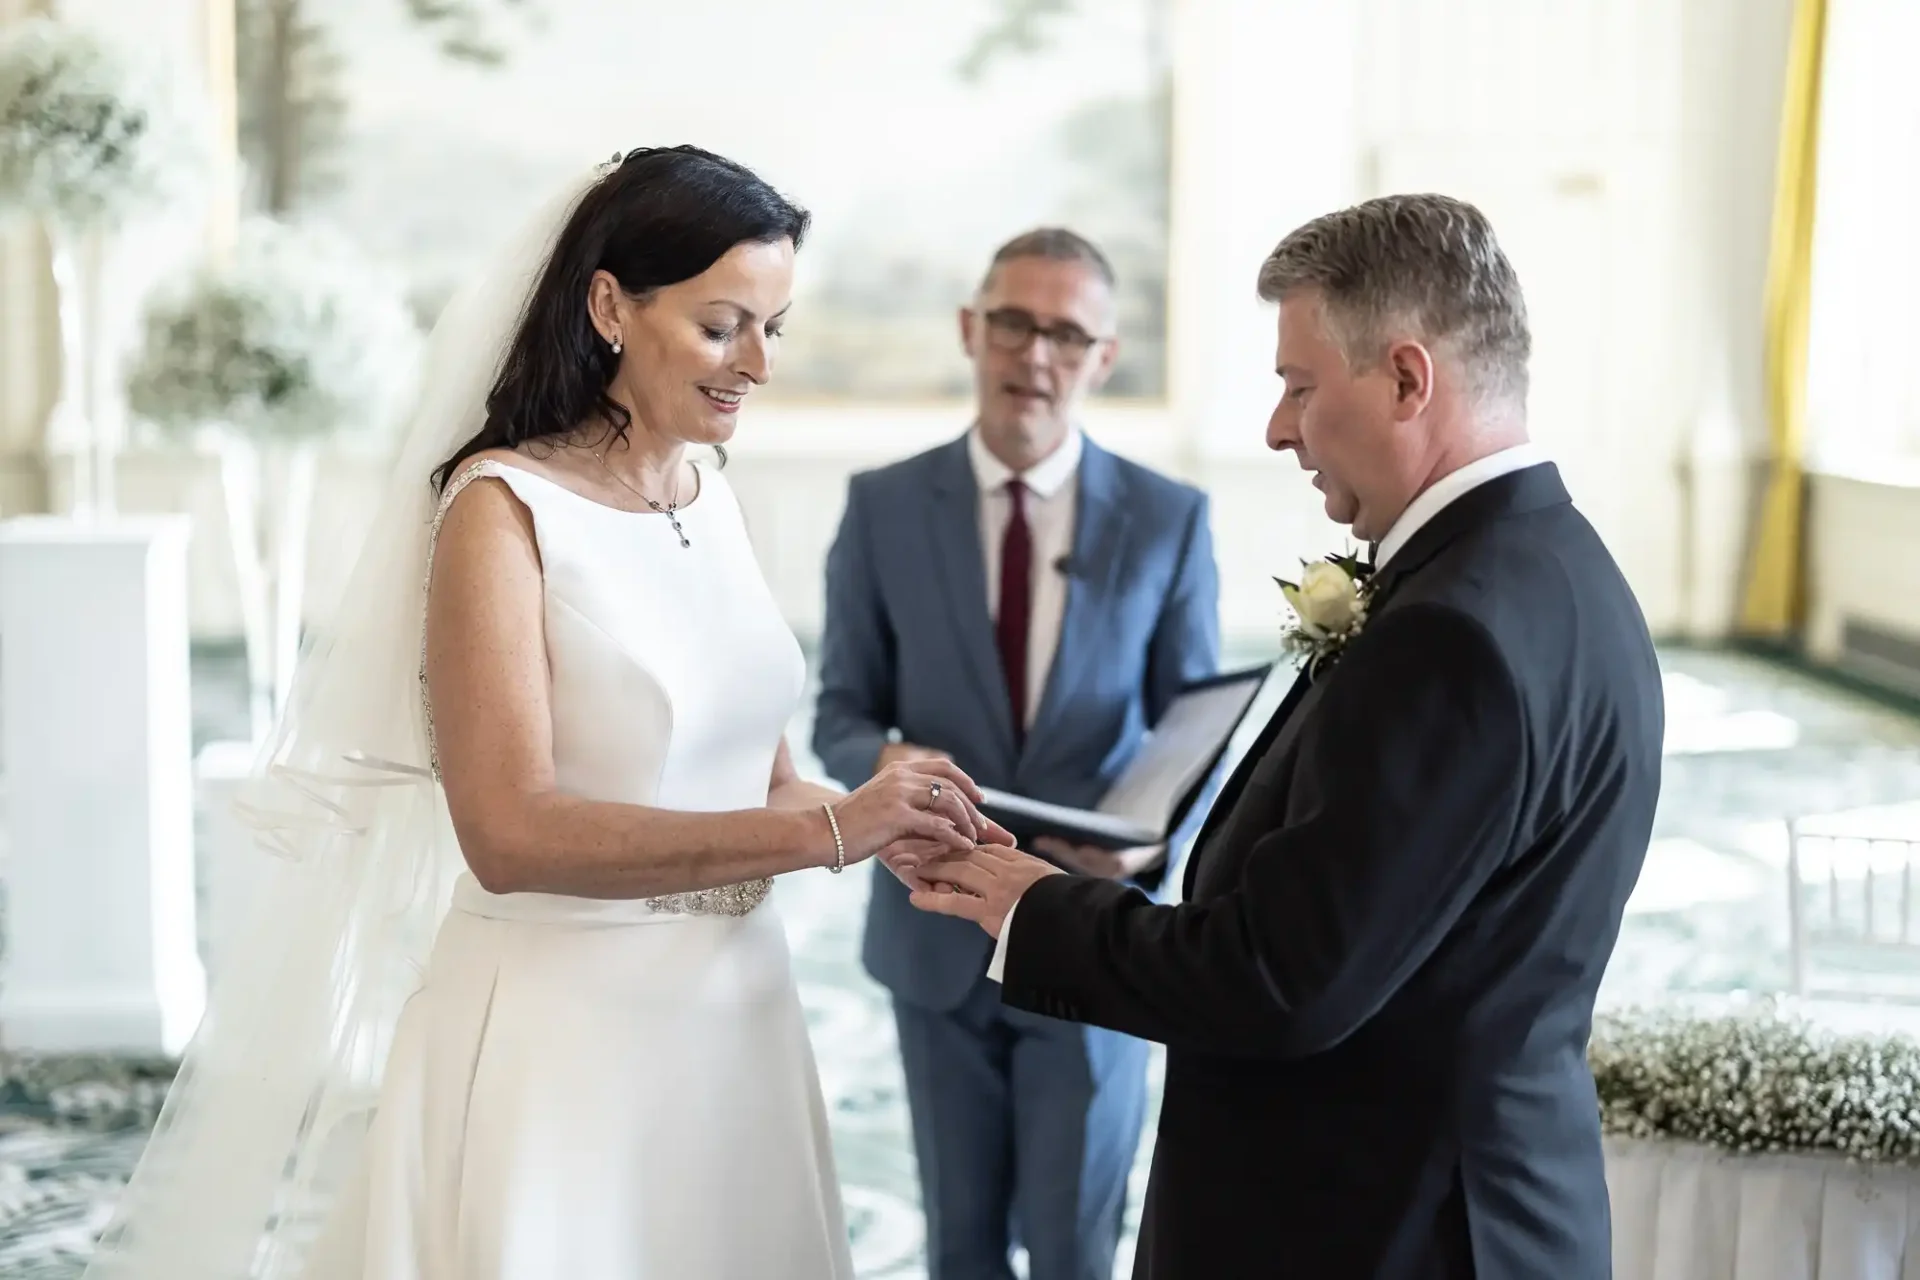 Bride in a white dress and groom in a black suit exchange rings during a wedding ceremony in a bright room, with an officiant standing in the background.